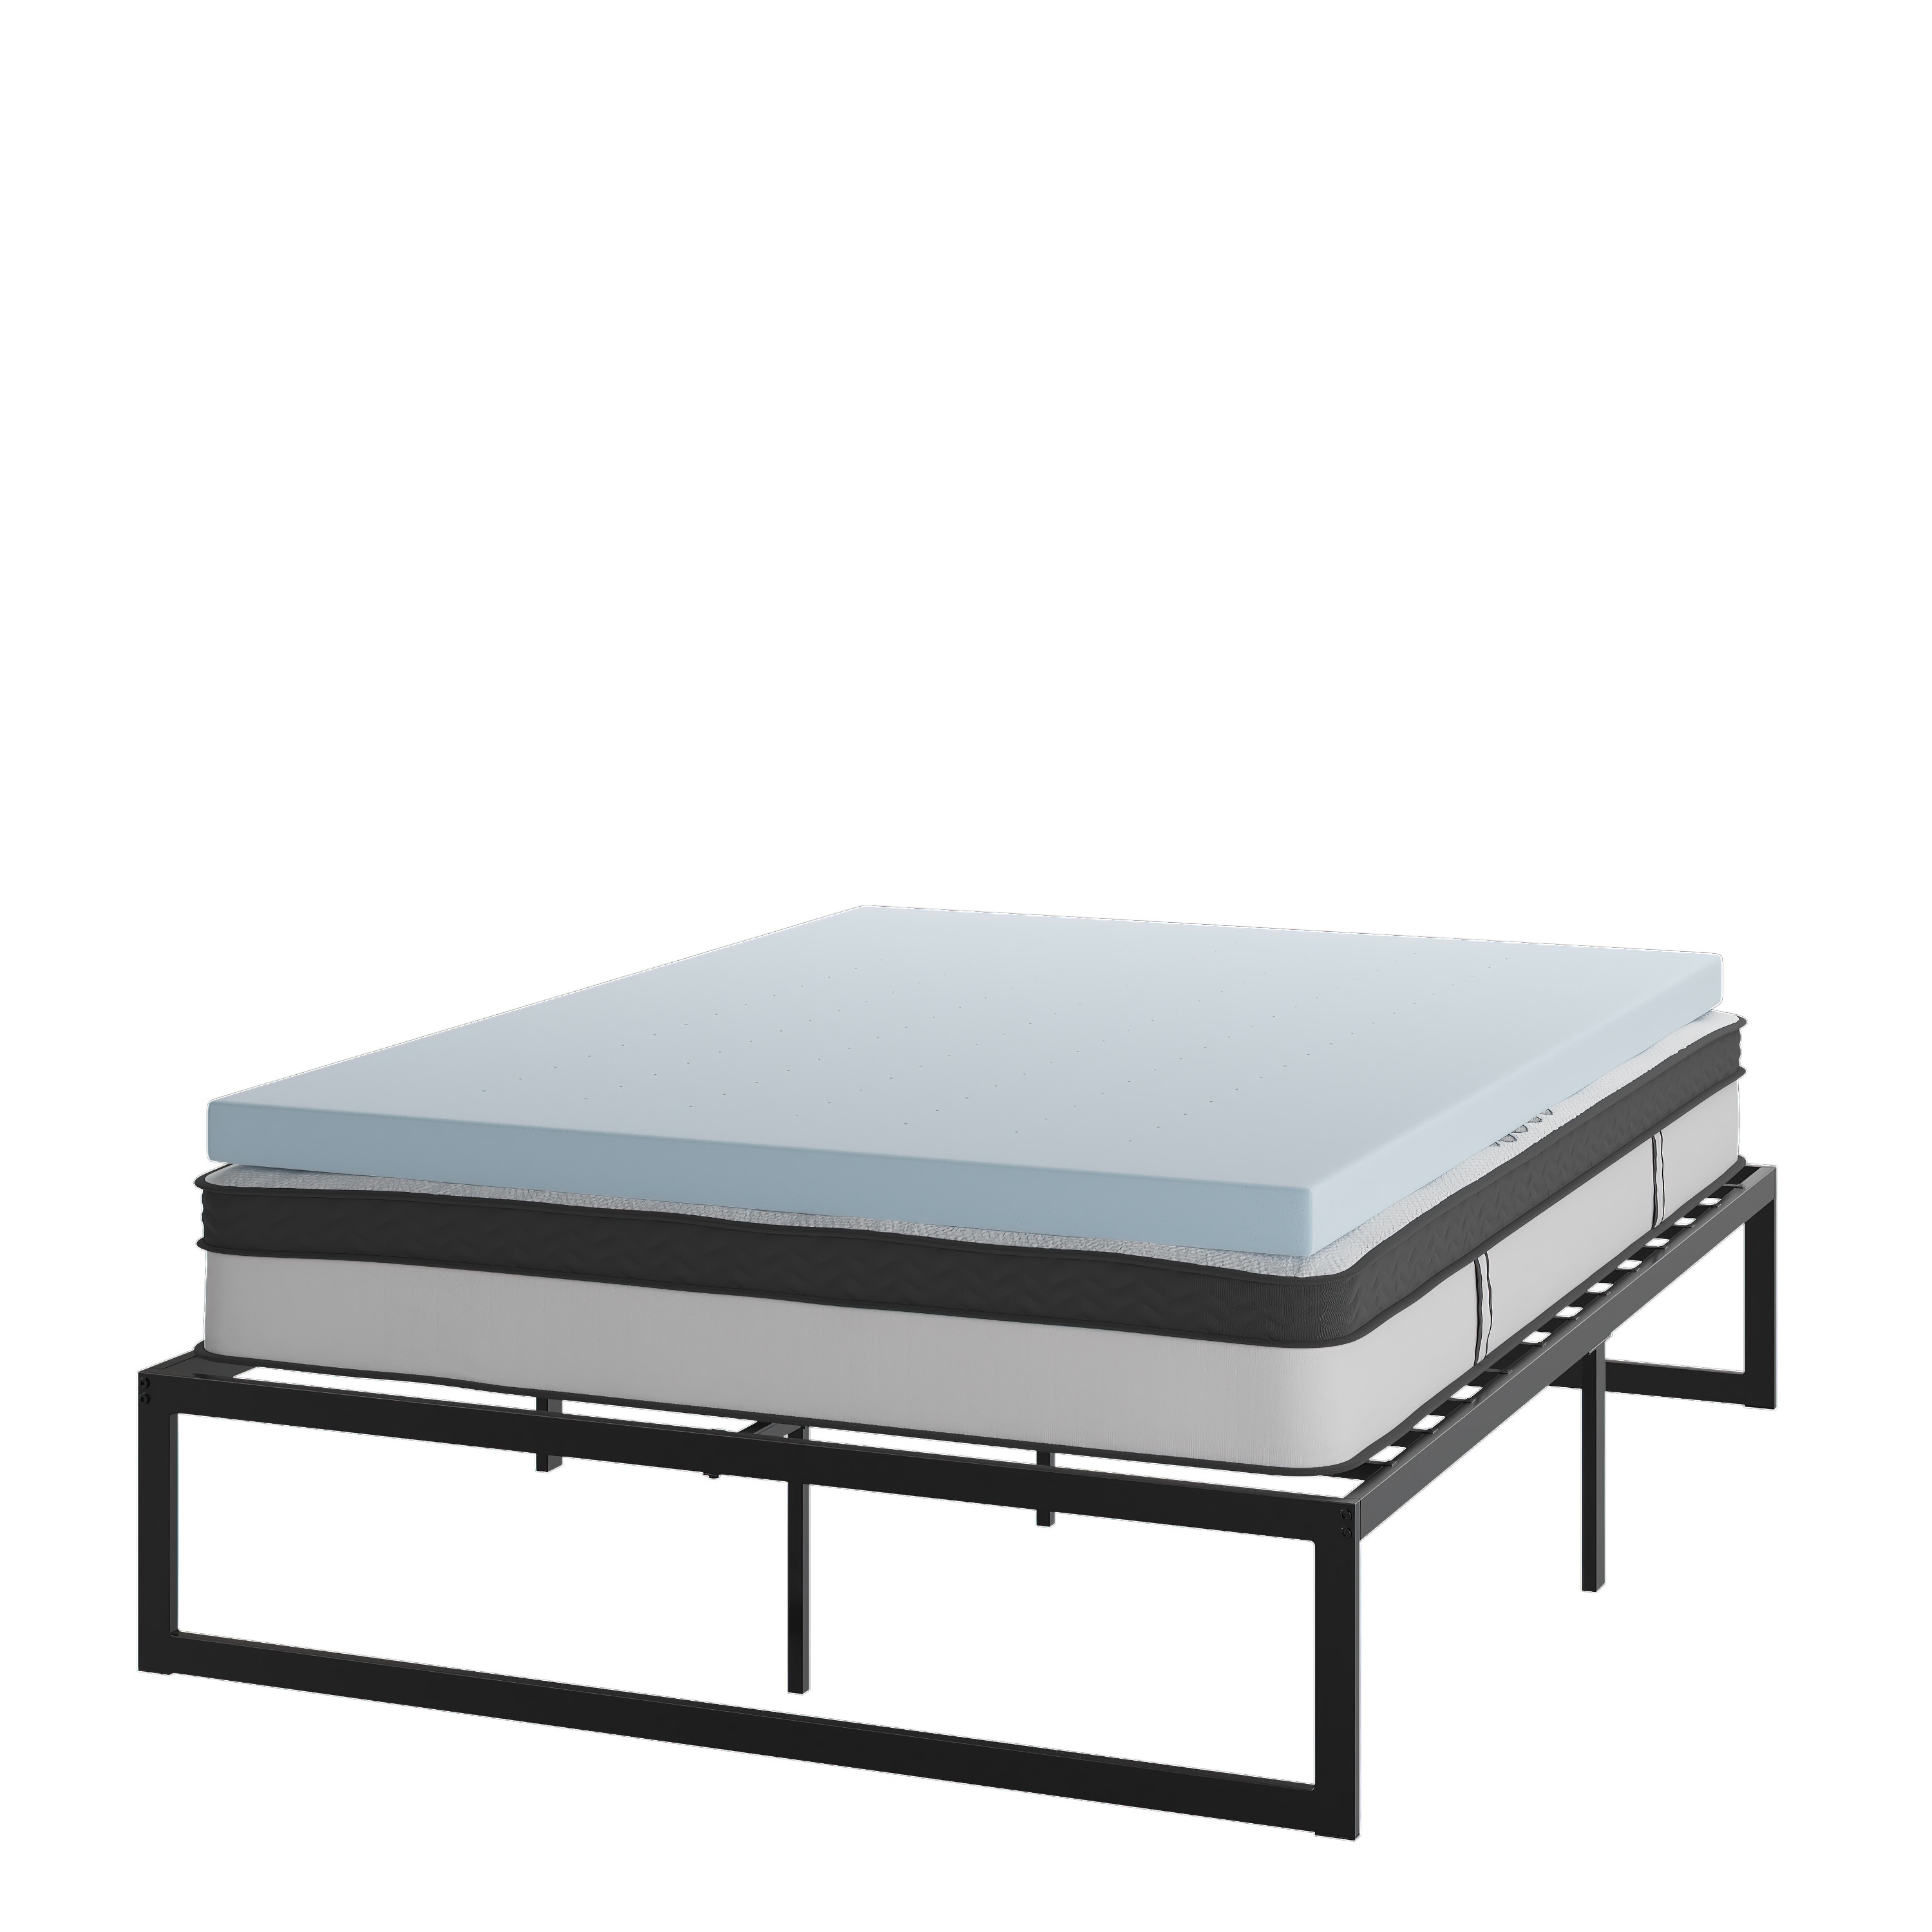 Flash Furniture 14 Inch Metal Platform Bed Frame with 10 Inch Pocket Spring Mattress and 3 inch Cool Gel Memory Foam Topper - Queen Queen -  889142989639